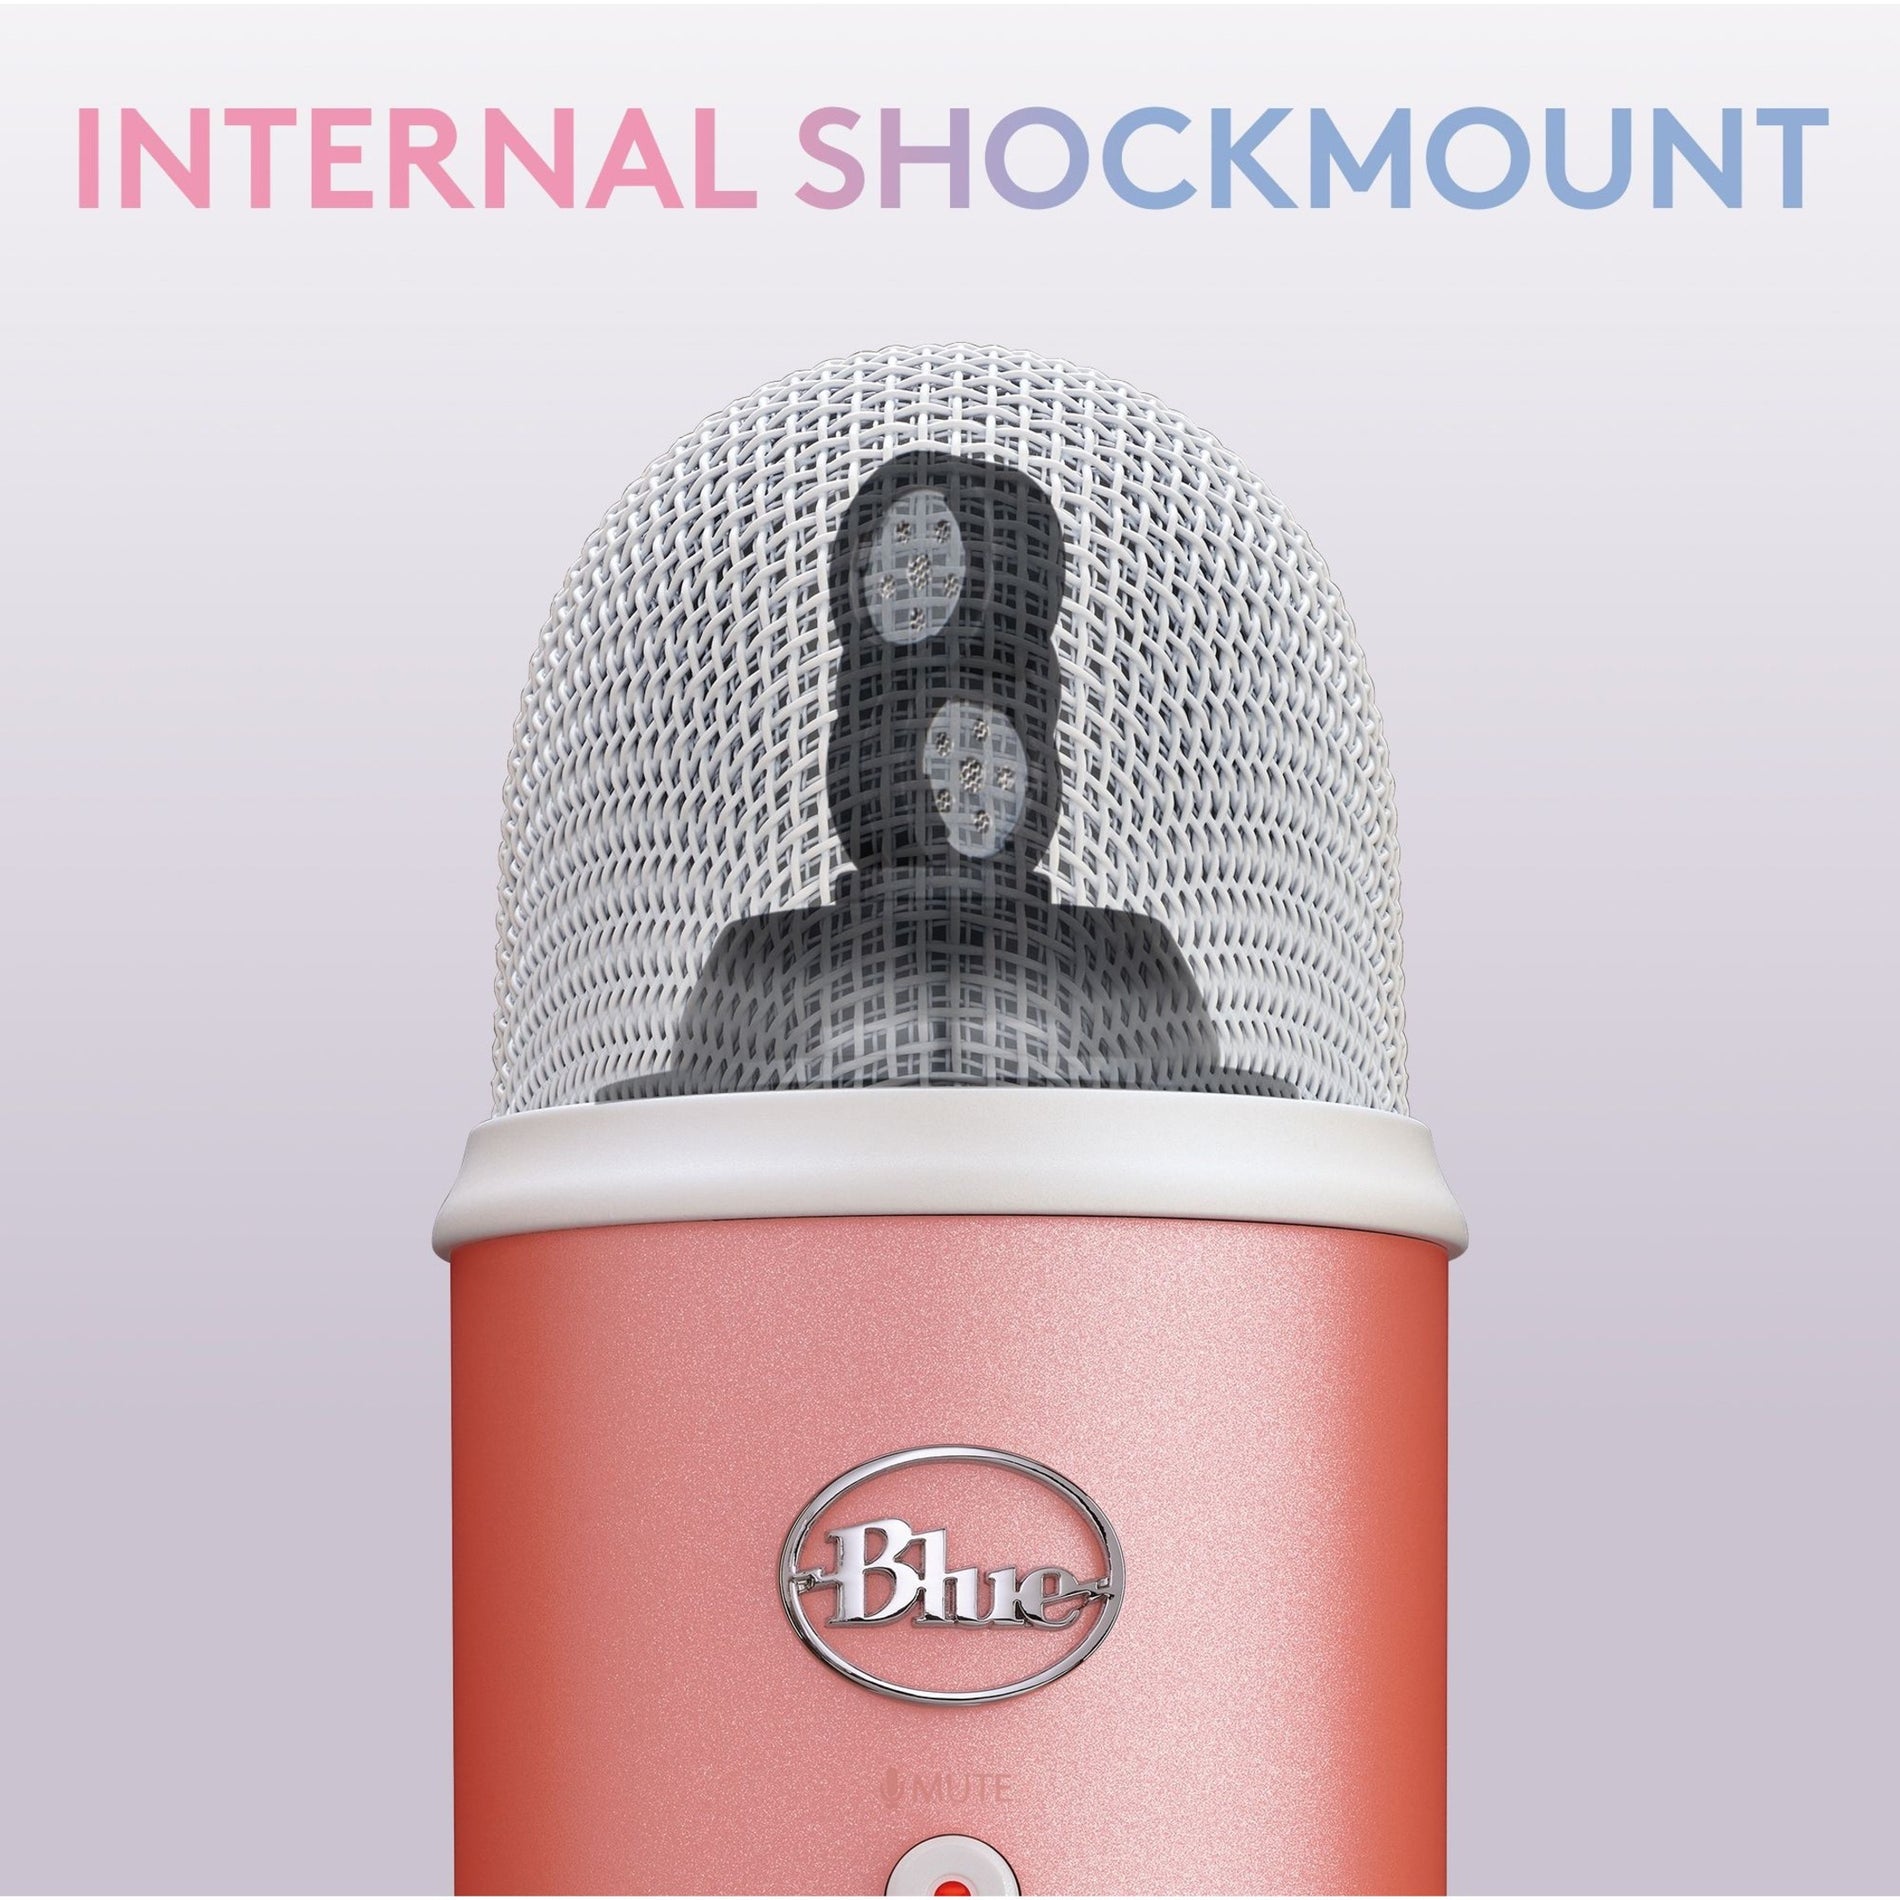 Blue 988-000530 Yeti Microphone, Pink Dawn - Ideal for Podcasting, Live Streaming, and Home Studio